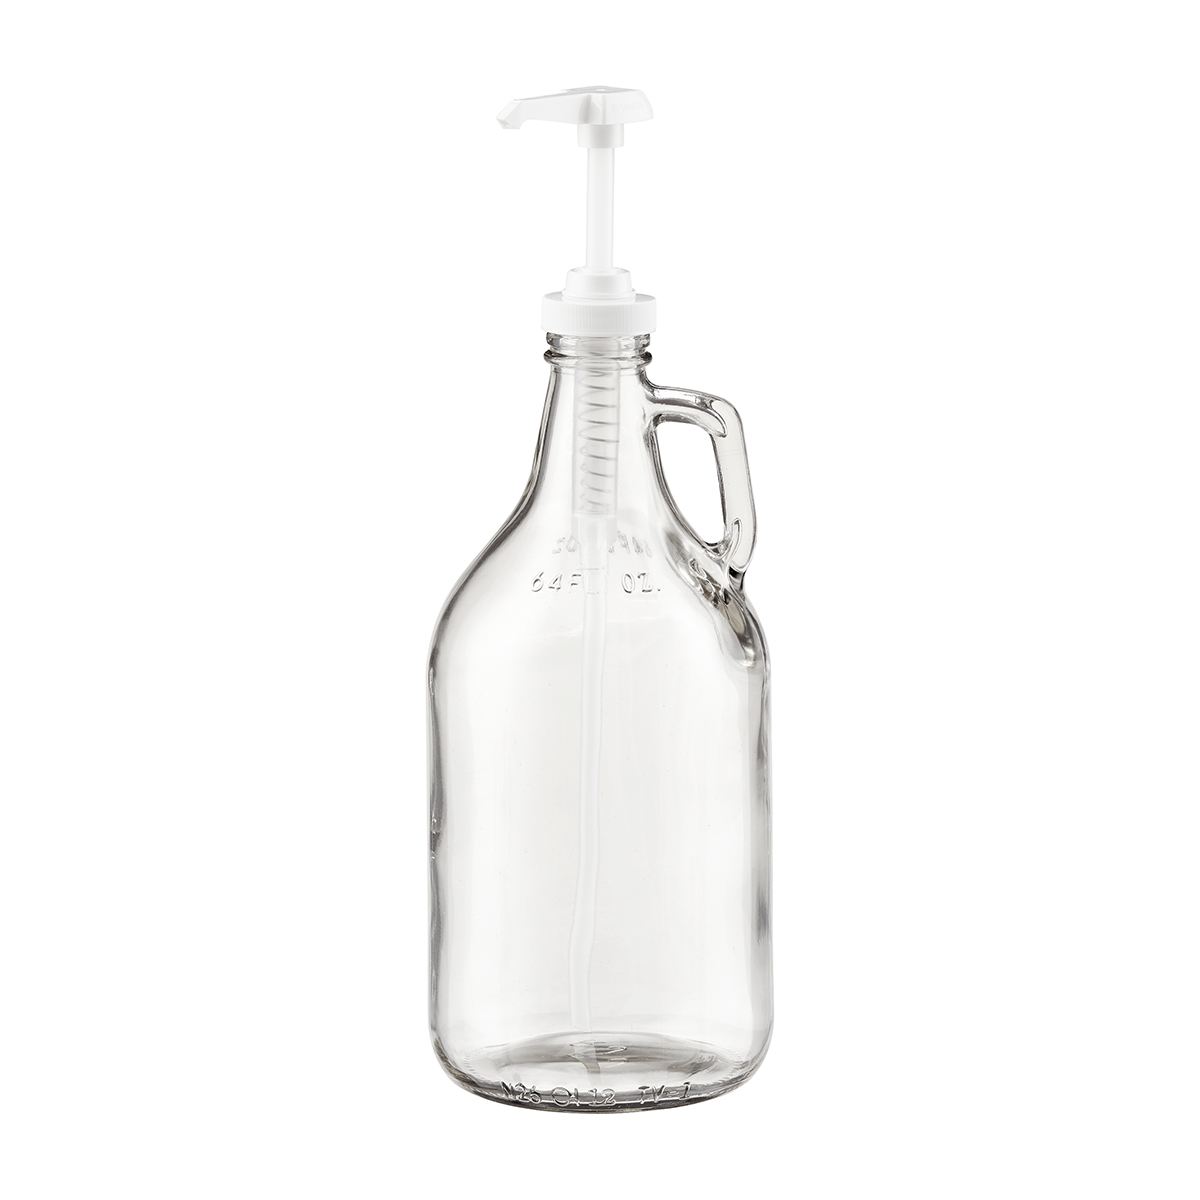 https://www.containerstore.com/catalogimages/520521/10096526-64-ounce-glass-pump-bottle.jpg